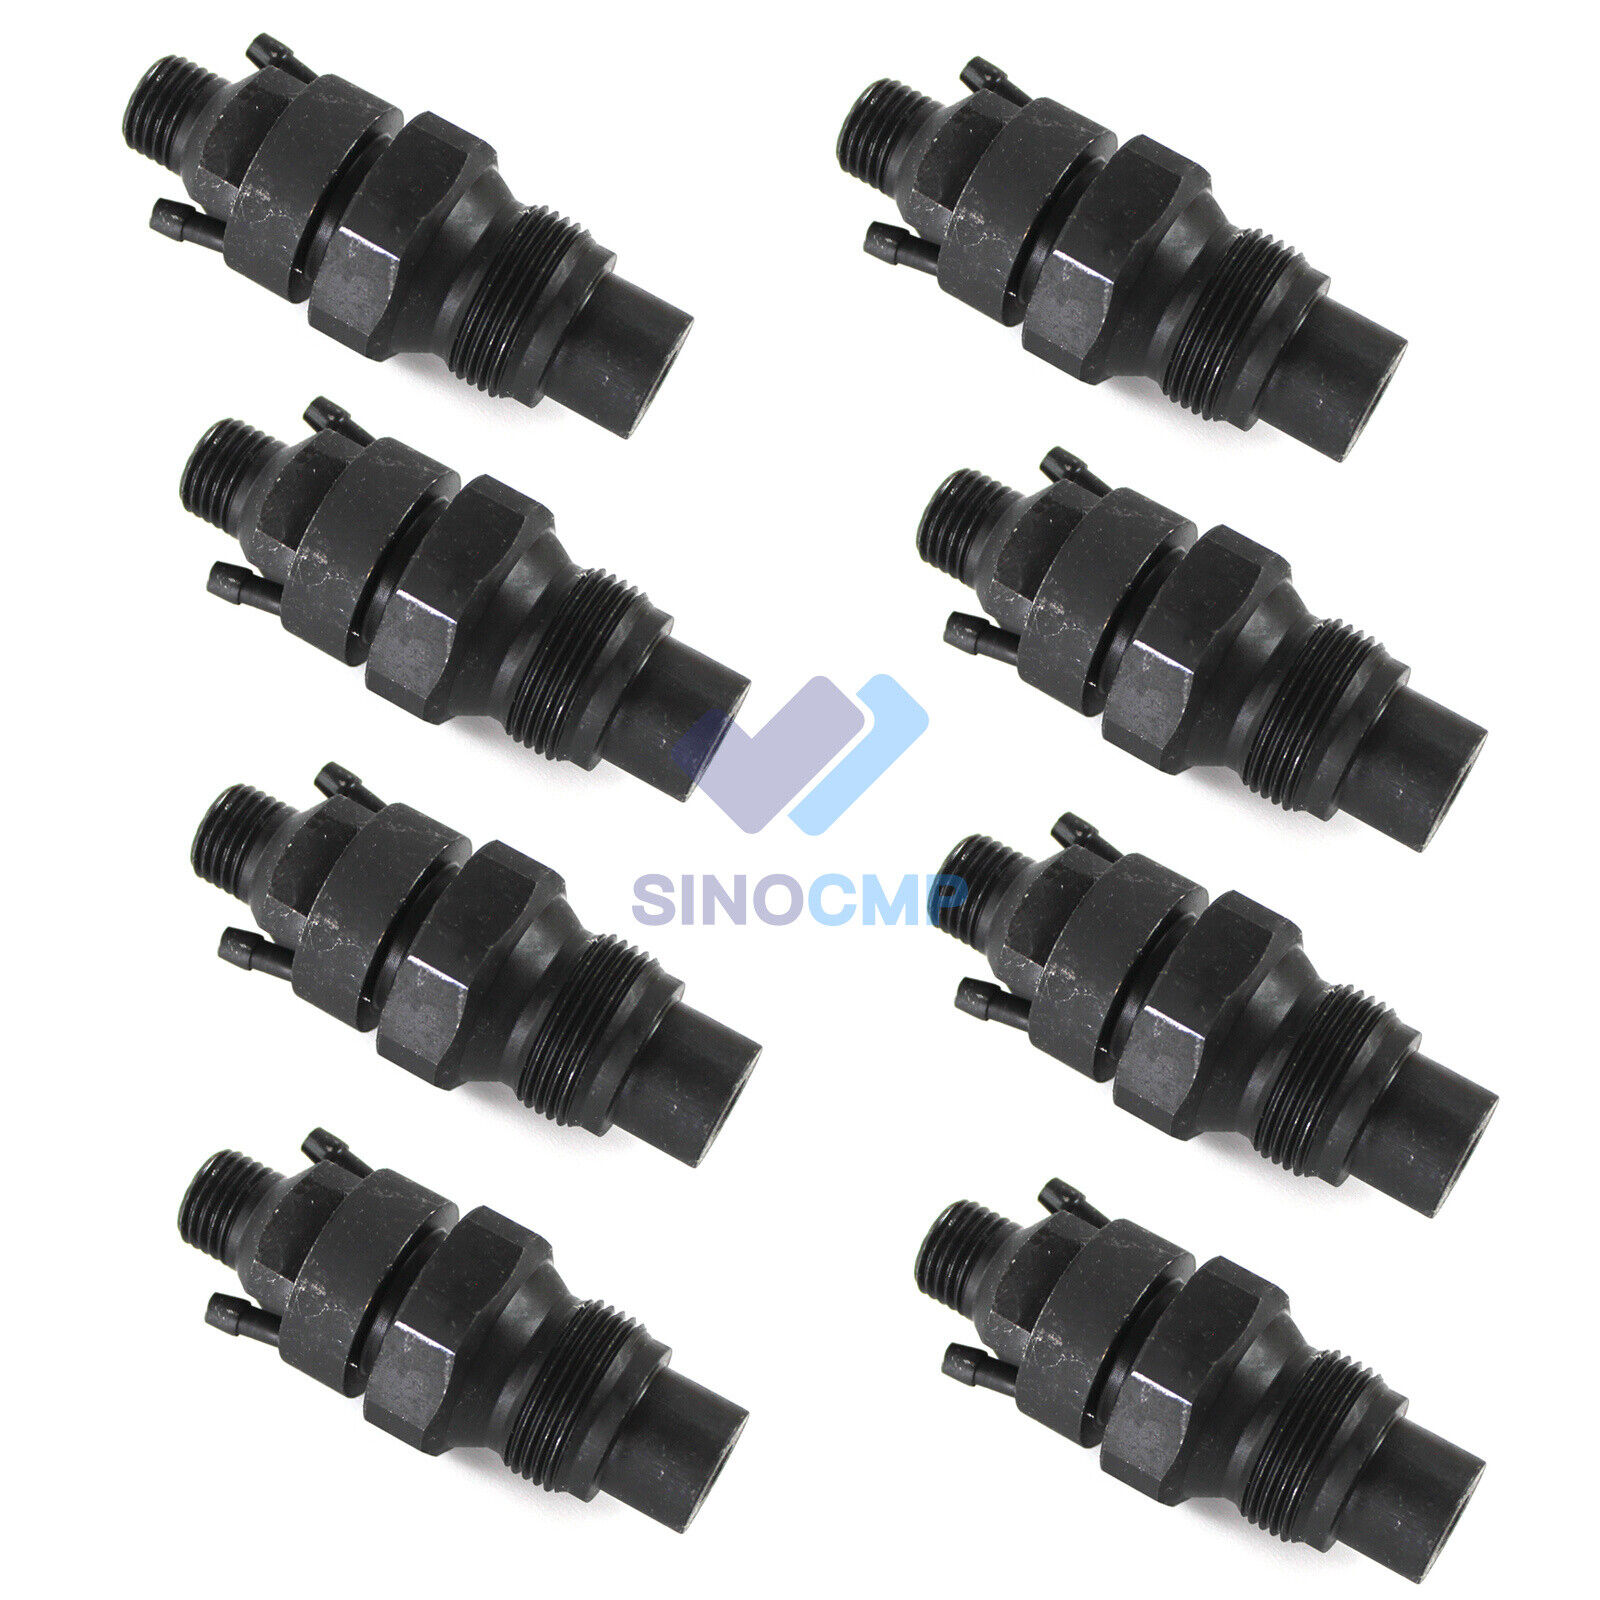 8PCS 6.5L Turbo Diesel Marine Injectors For GM Chevy 92-05 0432217255 1040166